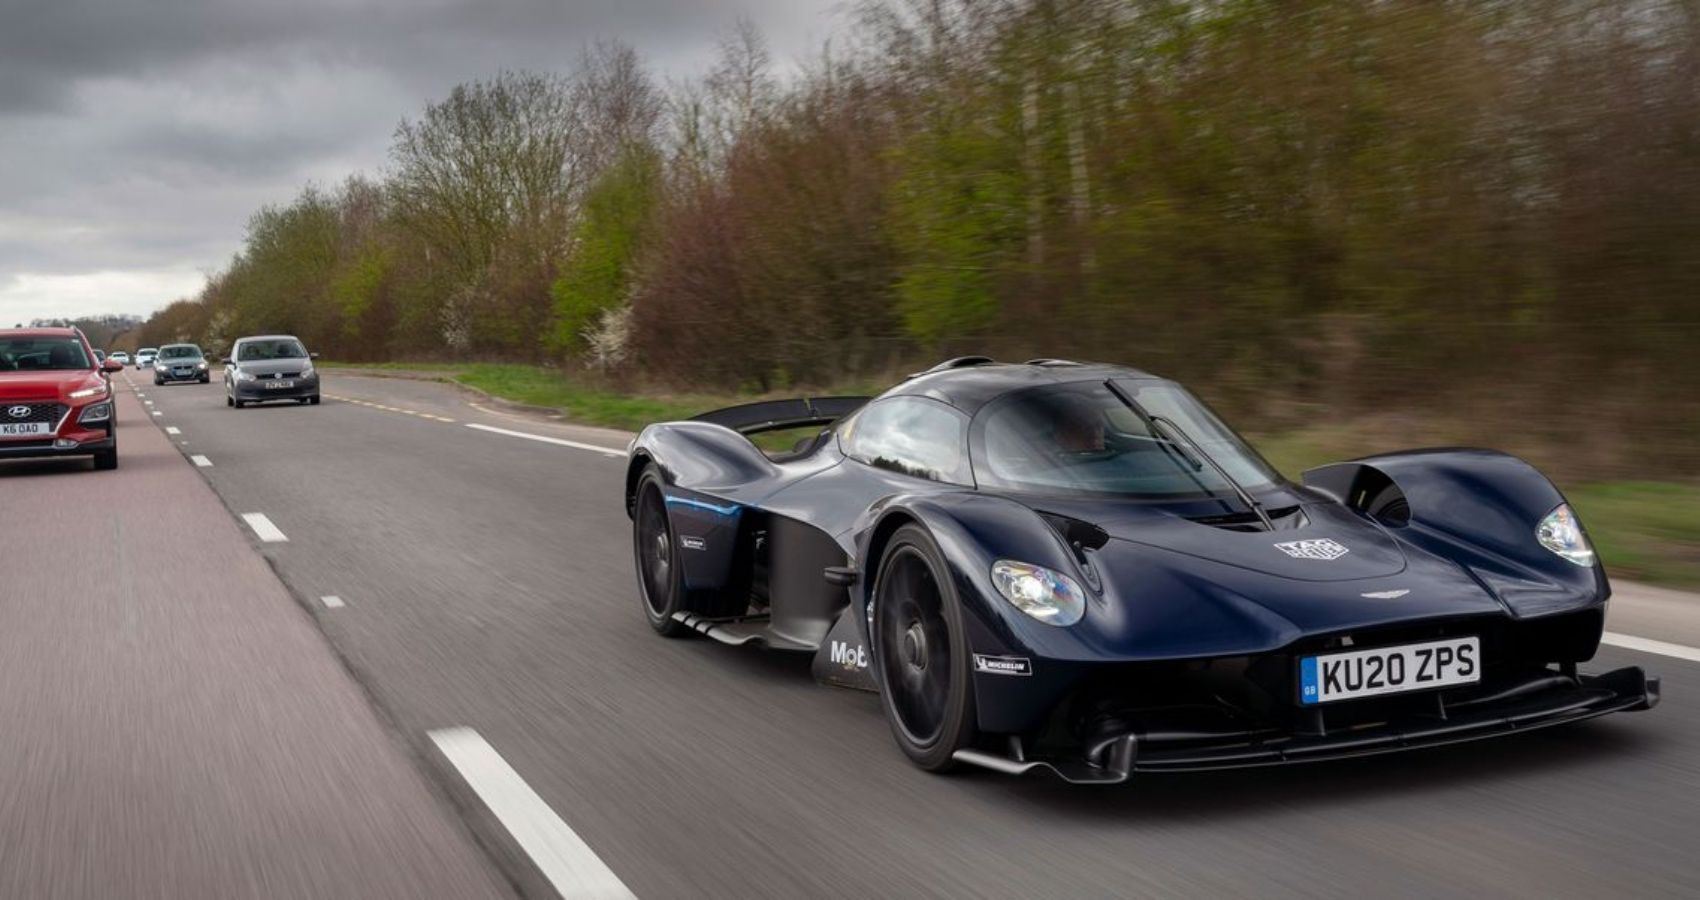 2022 Aston Martin Valkyrie on the road in the middle of traffic